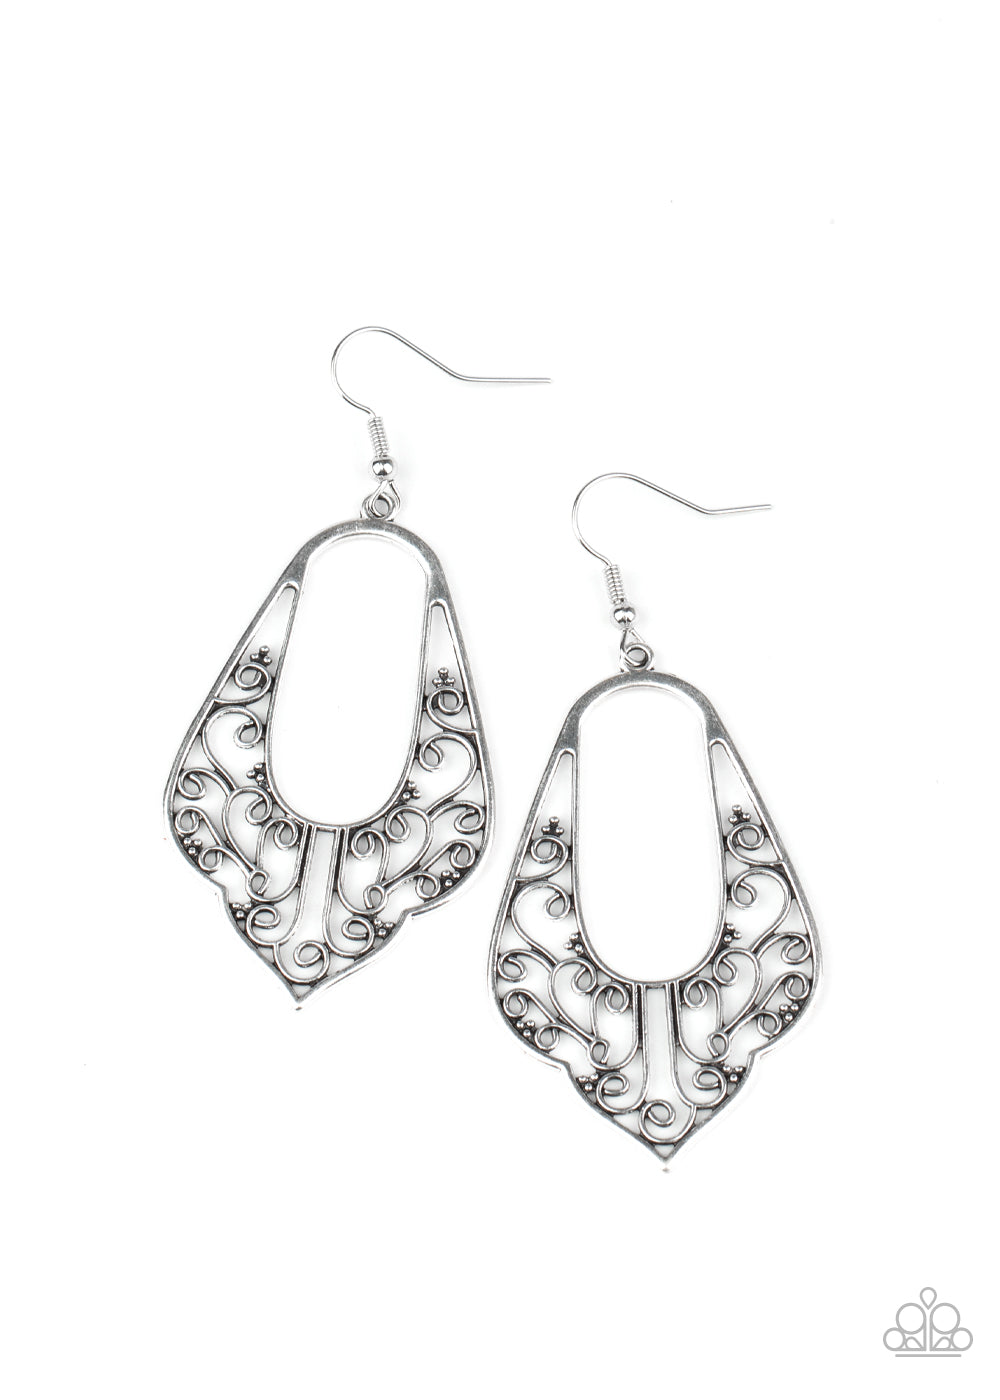 &lt;P&gt;Silver vine-like filigree climbs the bottom of a scalloped silver frame, coalescing into a vintage inspired look. Earring attaches to a standard fishhook fitting.&lt;/P&gt;  

&lt;P&gt; &lt;I&gt;  Sold as one pair of earrings. &lt;/I&gt;  &lt;/P&gt;


&lt;img src=\&quot;https://d9b54x484lq62.cloudfront.net/paparazzi/shopping/images/517_tag150x115_1.png\&quot; alt=\&quot;New Kit\&quot; align=\&quot;middle\&quot; height=\&quot;50\&quot; width=\&quot;50\&quot;/&gt;